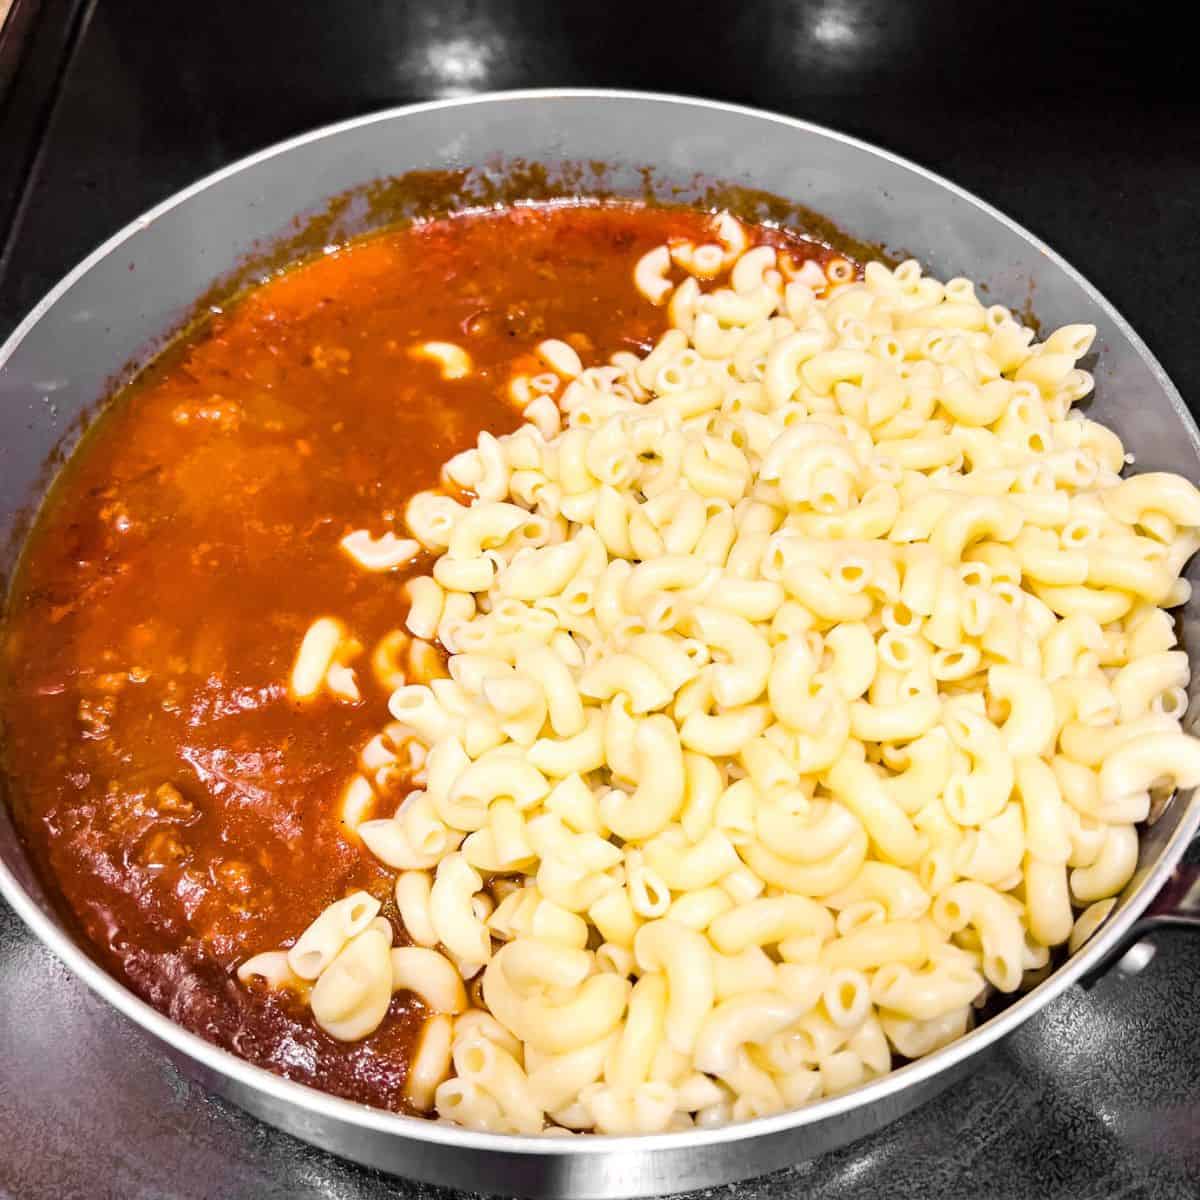 Combining cooked macaroni and the sauce.